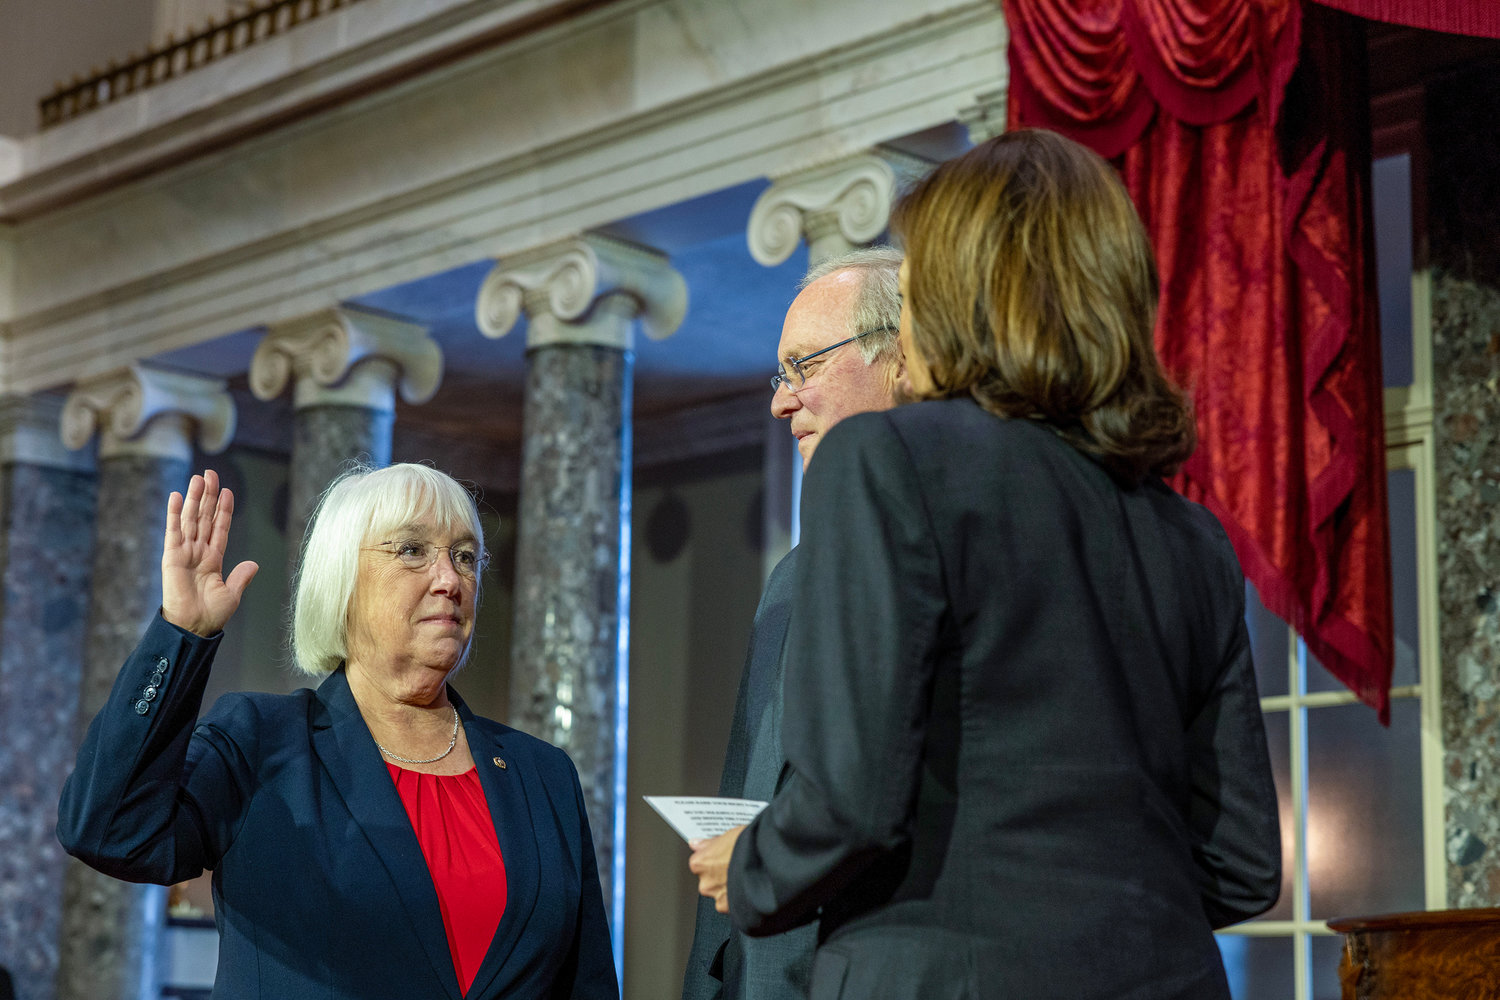 Vice President Kamala Harris swears in Sen. Patty Murray (D-WA), along side her husband Rob Murray in the old senate chamber for the Ceremonial Swearing on Tuesday, Jan. 3, 2023, in Washington, D.C. (Tasos Katopodis/Getty Images/TNS)